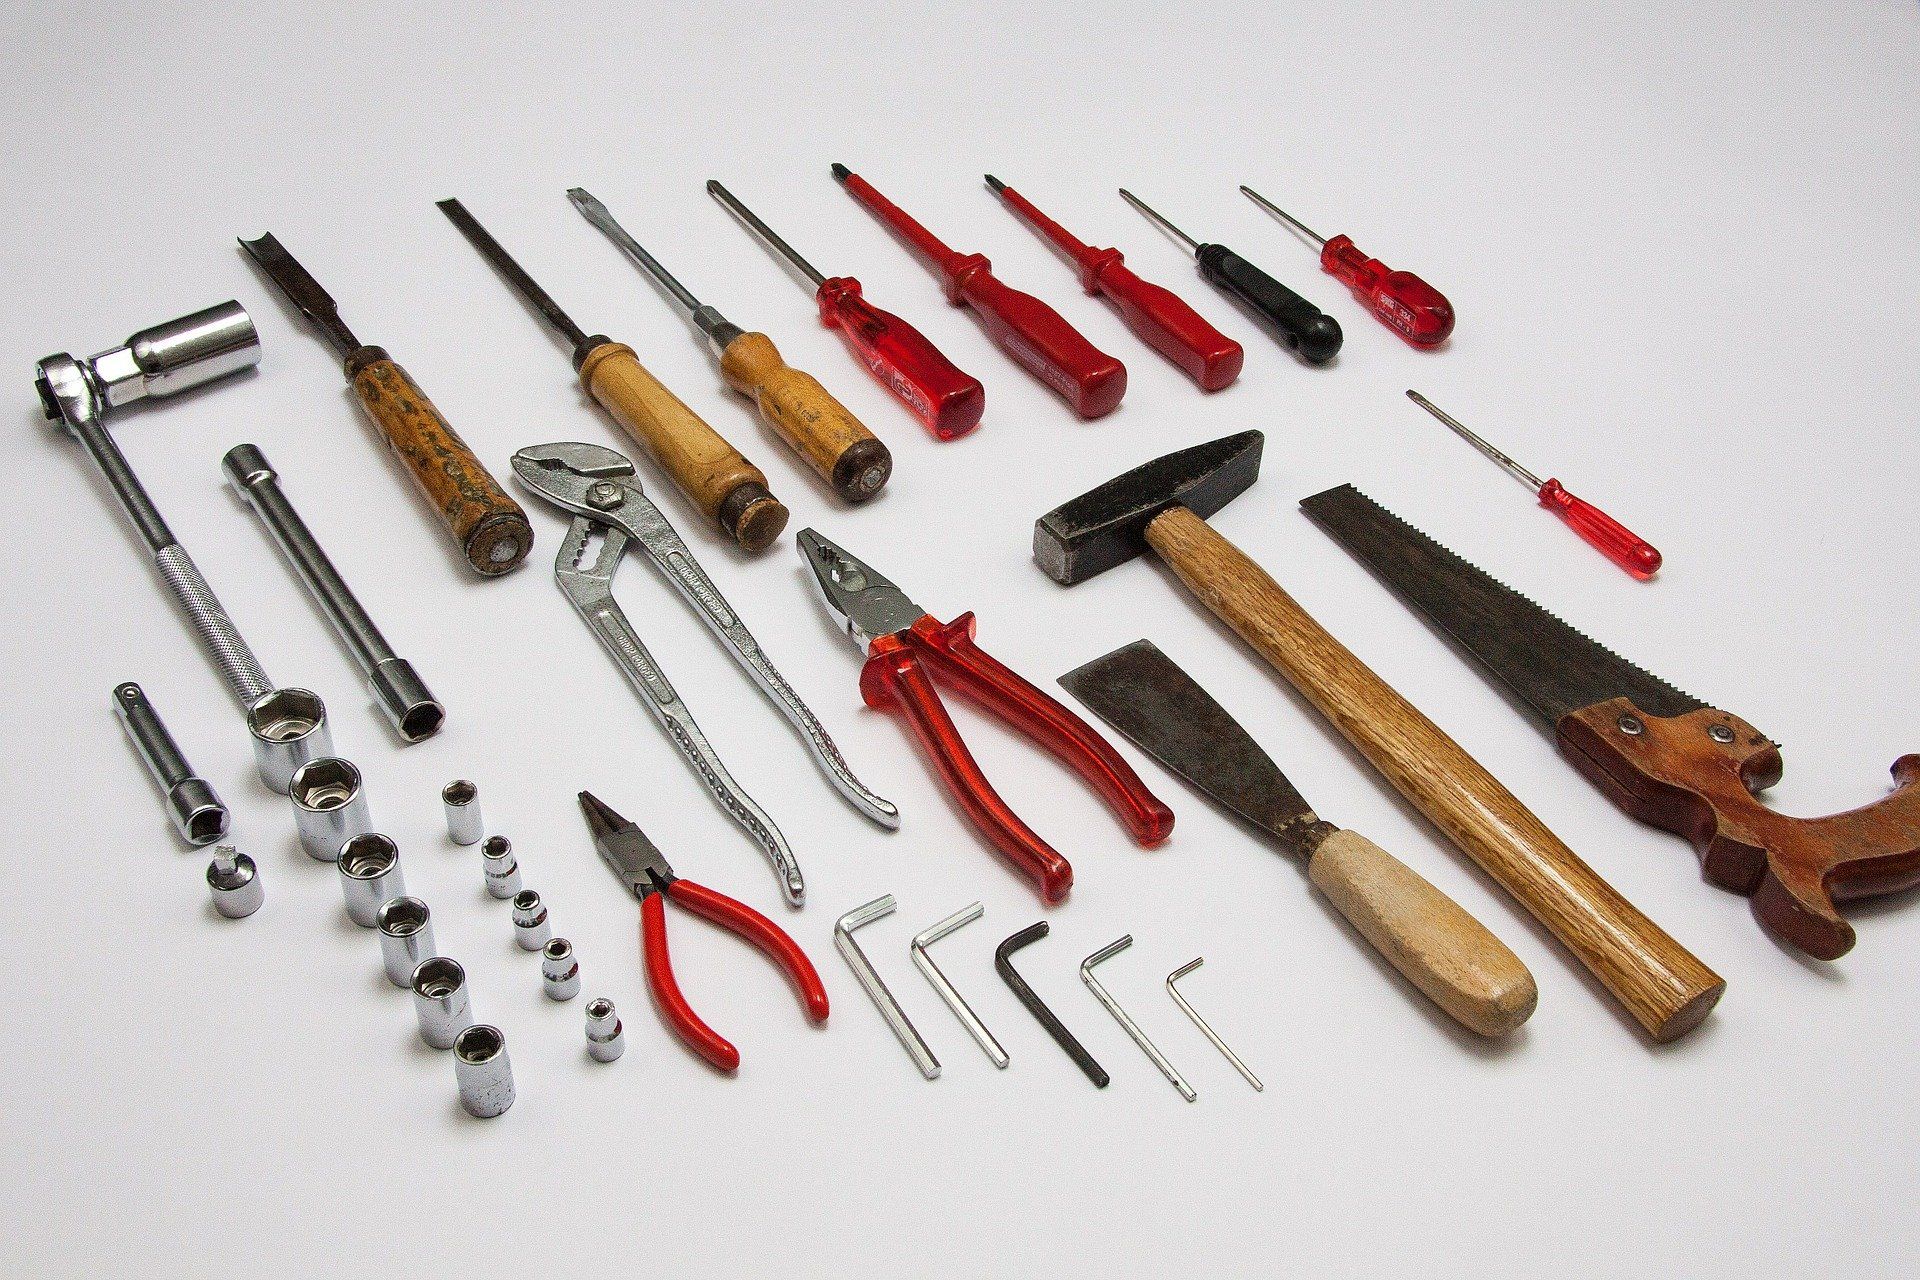 variety of tools laid out on a white table